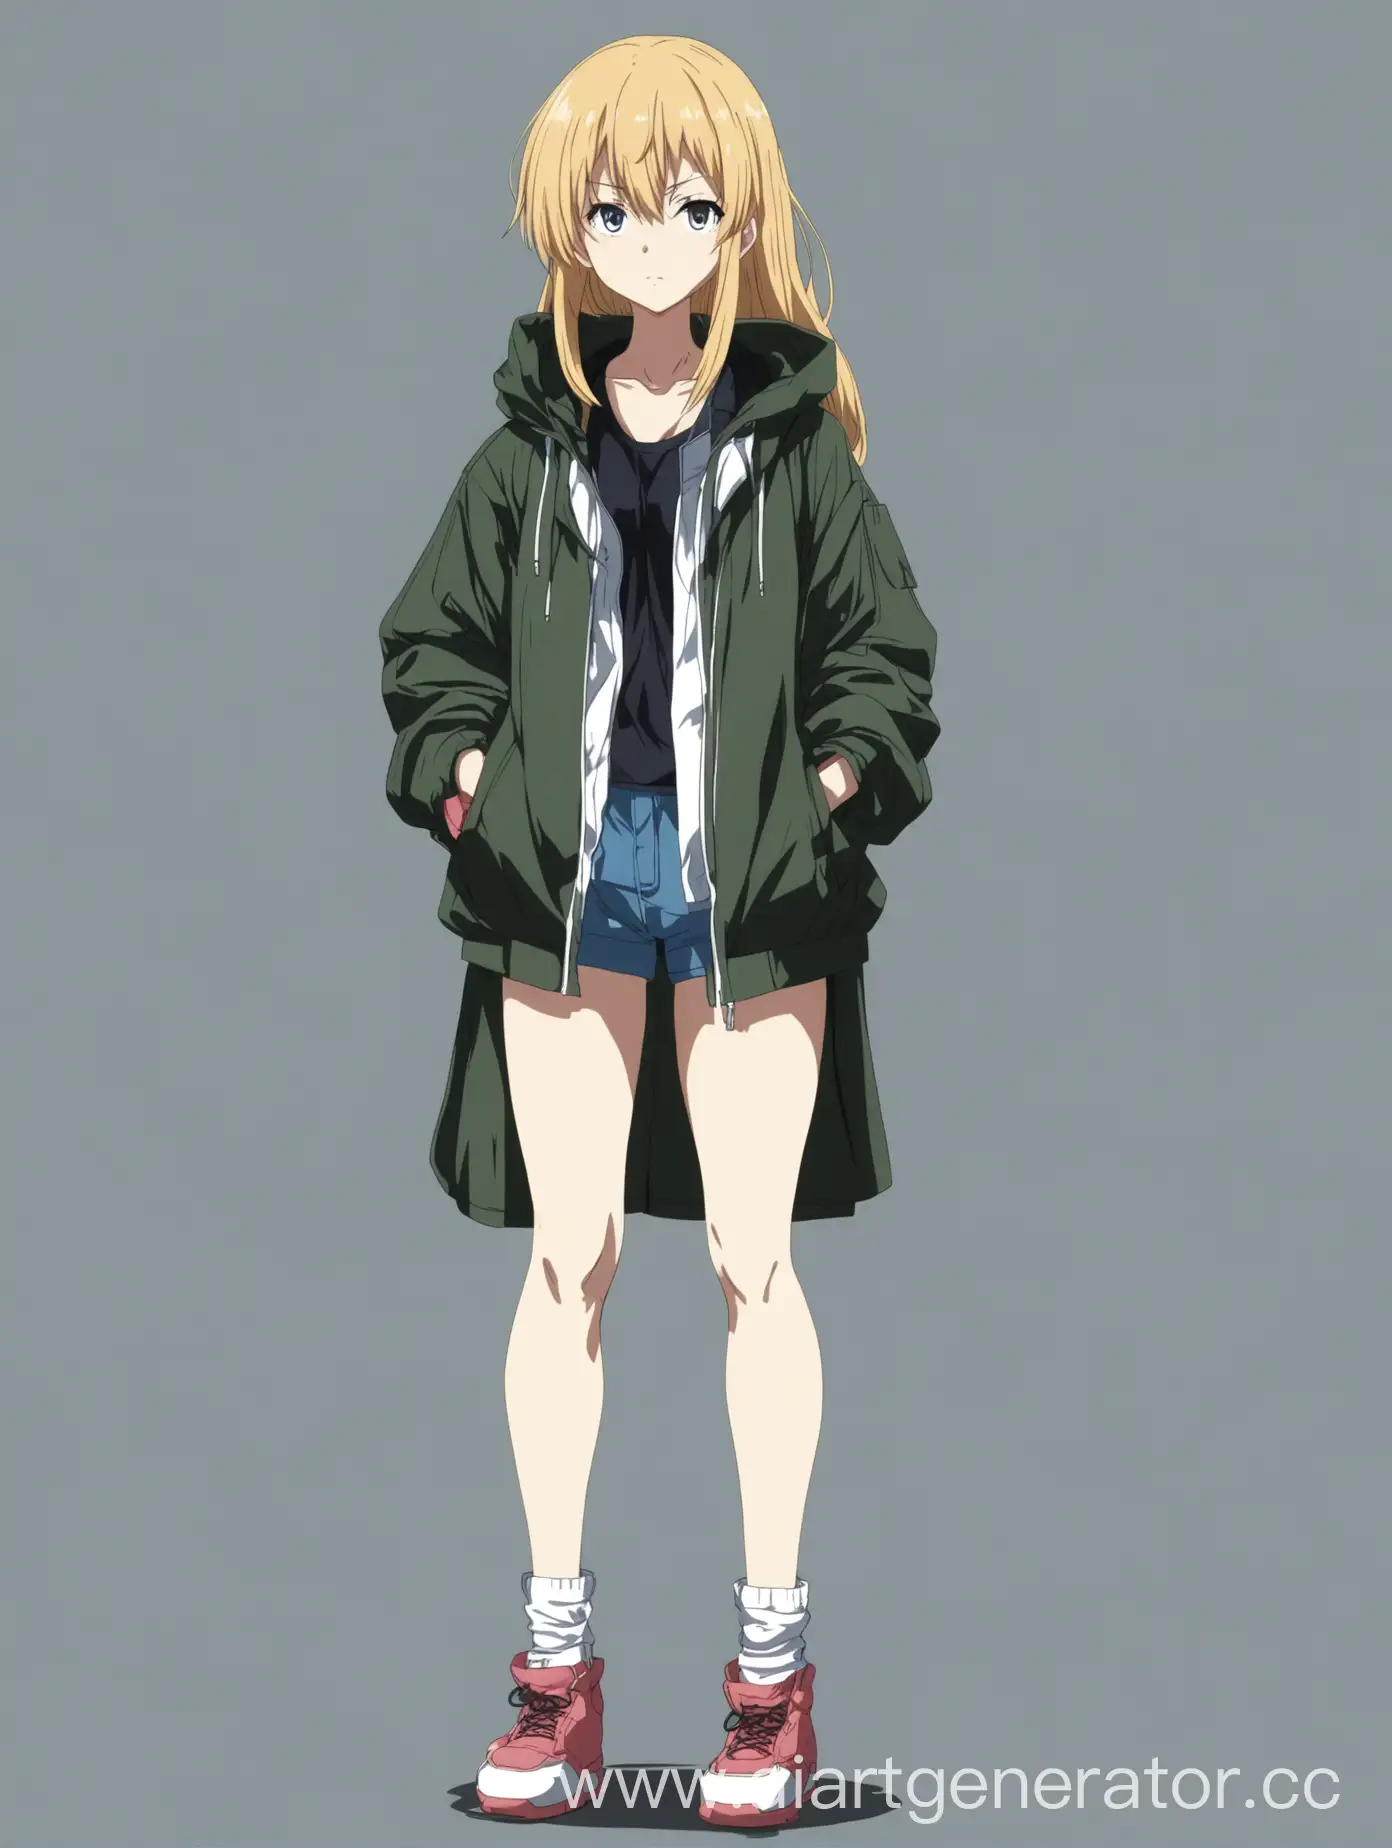 Stylish-Anime-Girl-in-FullLength-Jacket-Fashionable-HipHop-Inspired-Character-Illustration